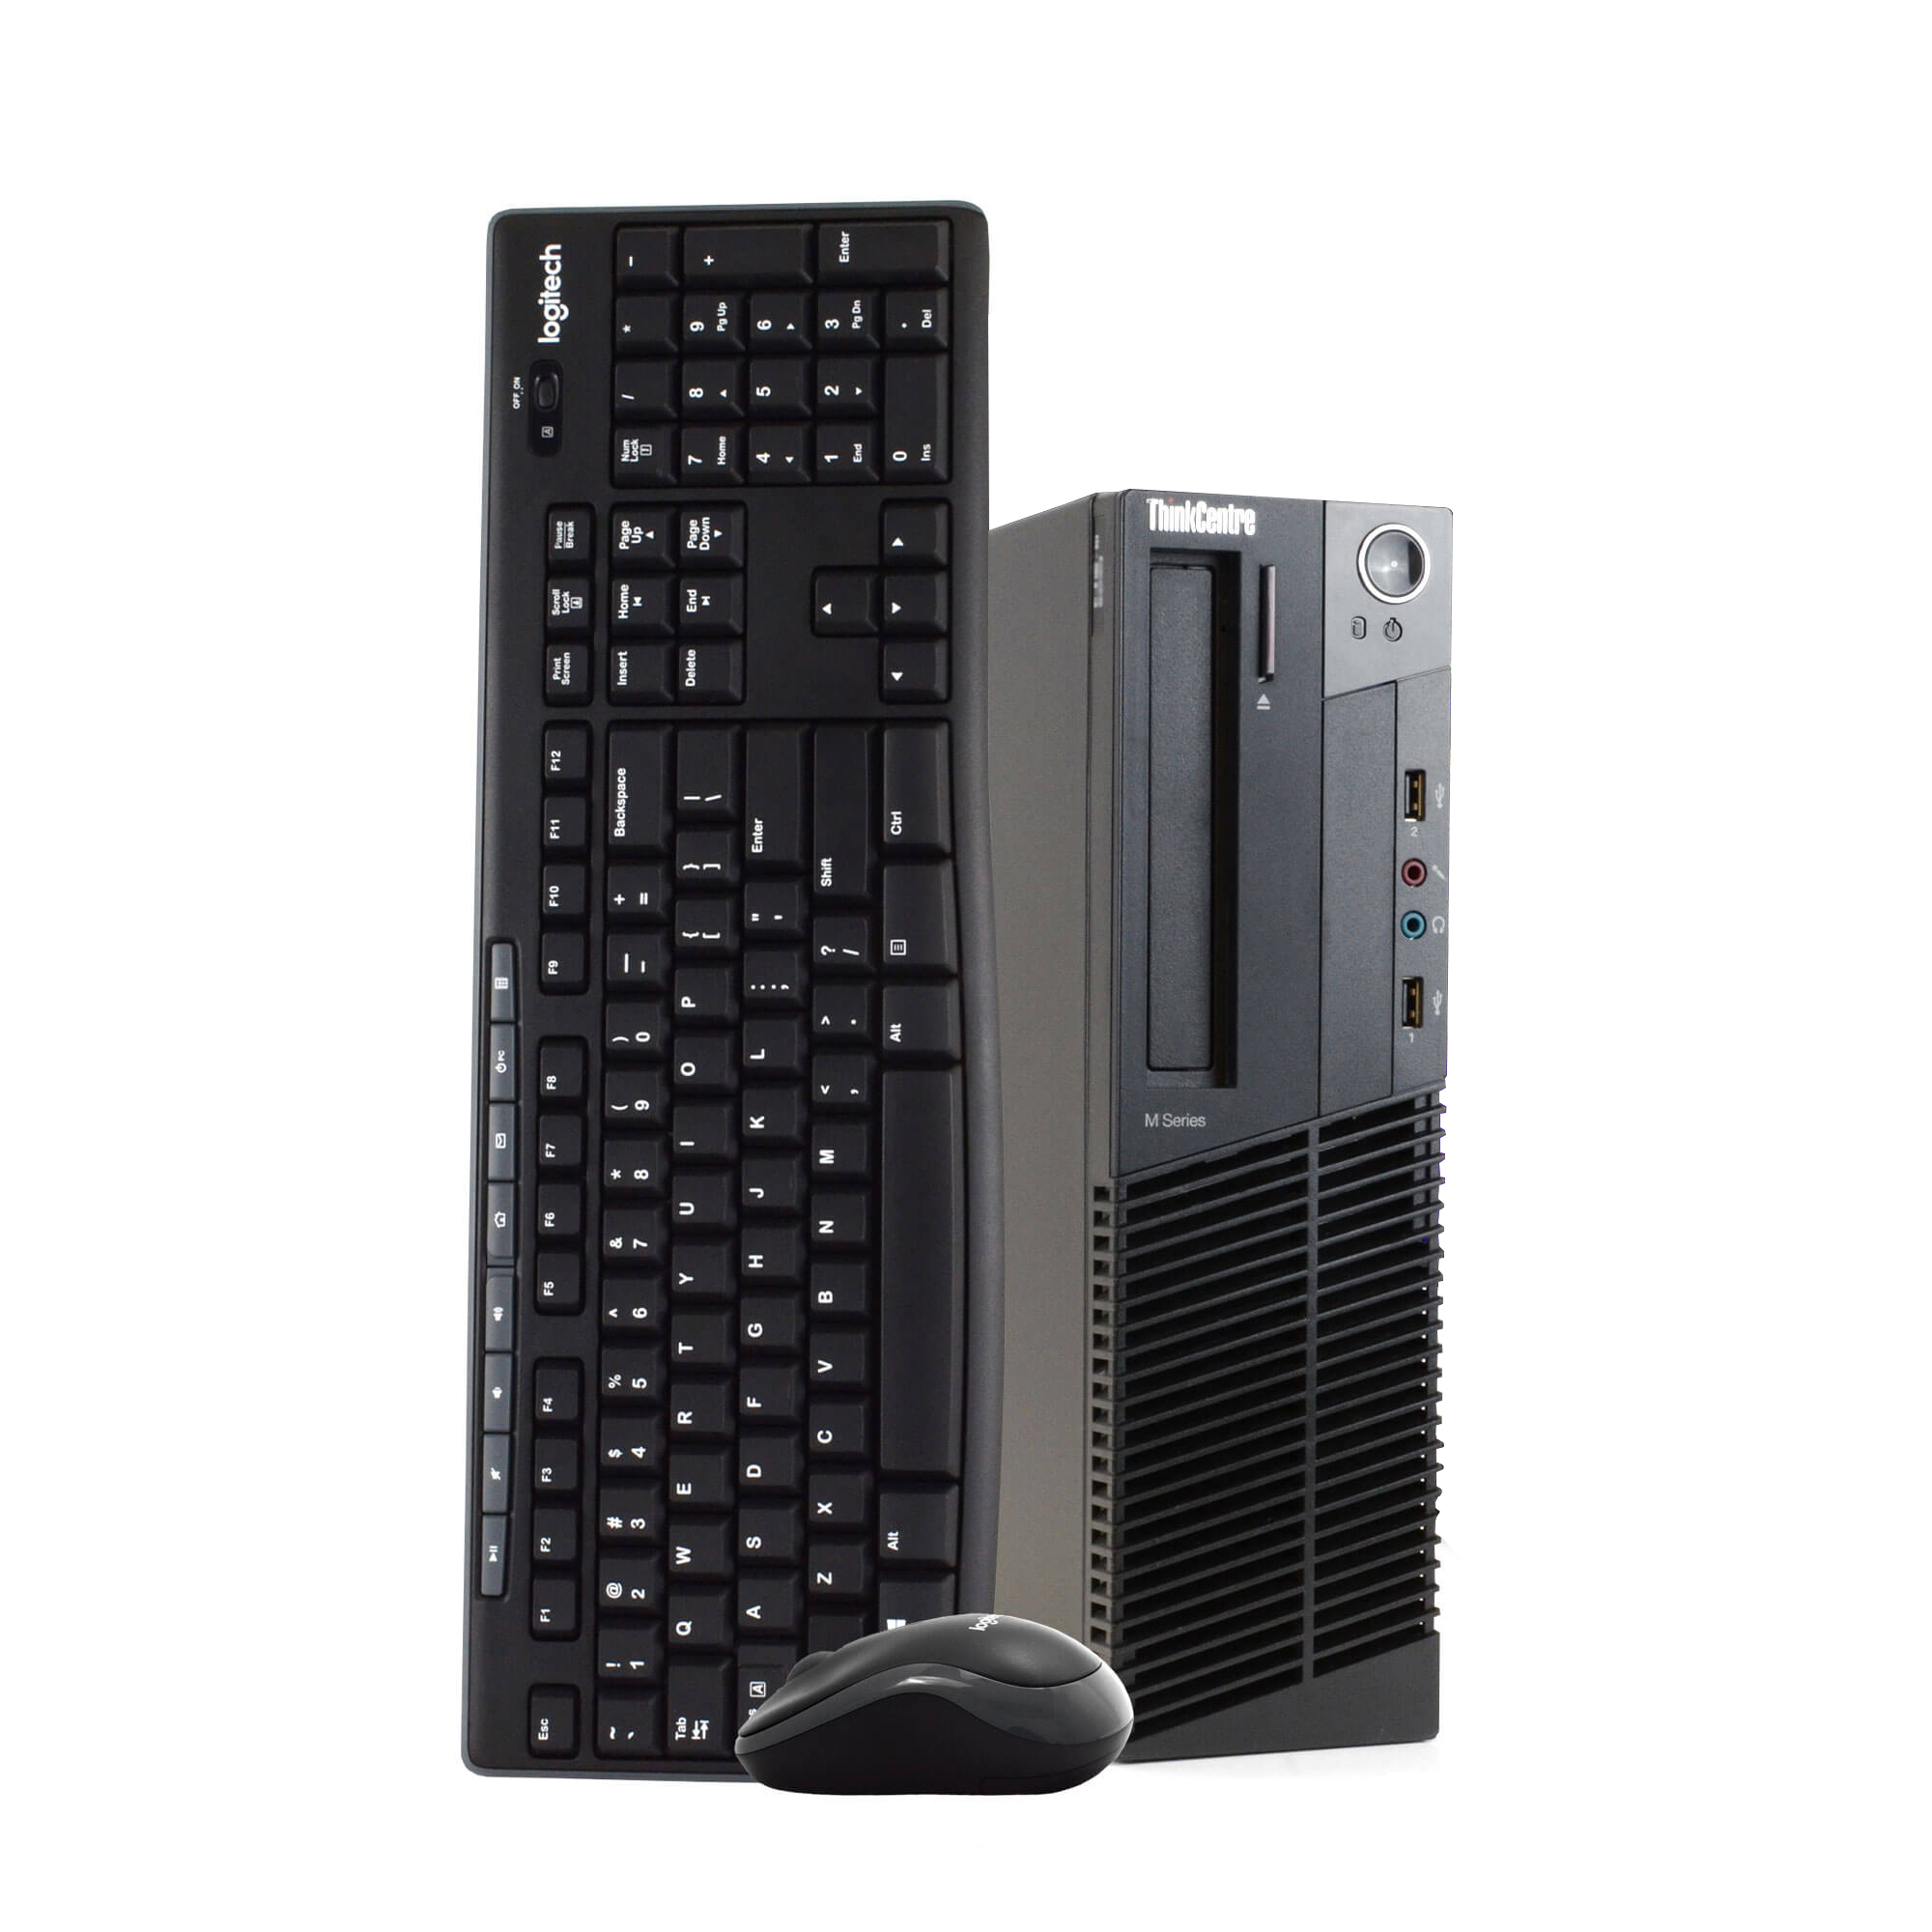 IBM ThinkCentre M92P Desktop Computer PC, Intel Quad-Core i7, 1TB HDD, 8GB DDR3 RAM, Windows 10 Pro, DVD, WIFI, Wireless Keyboard and Mouse (Used - Like New) - image 1 of 6